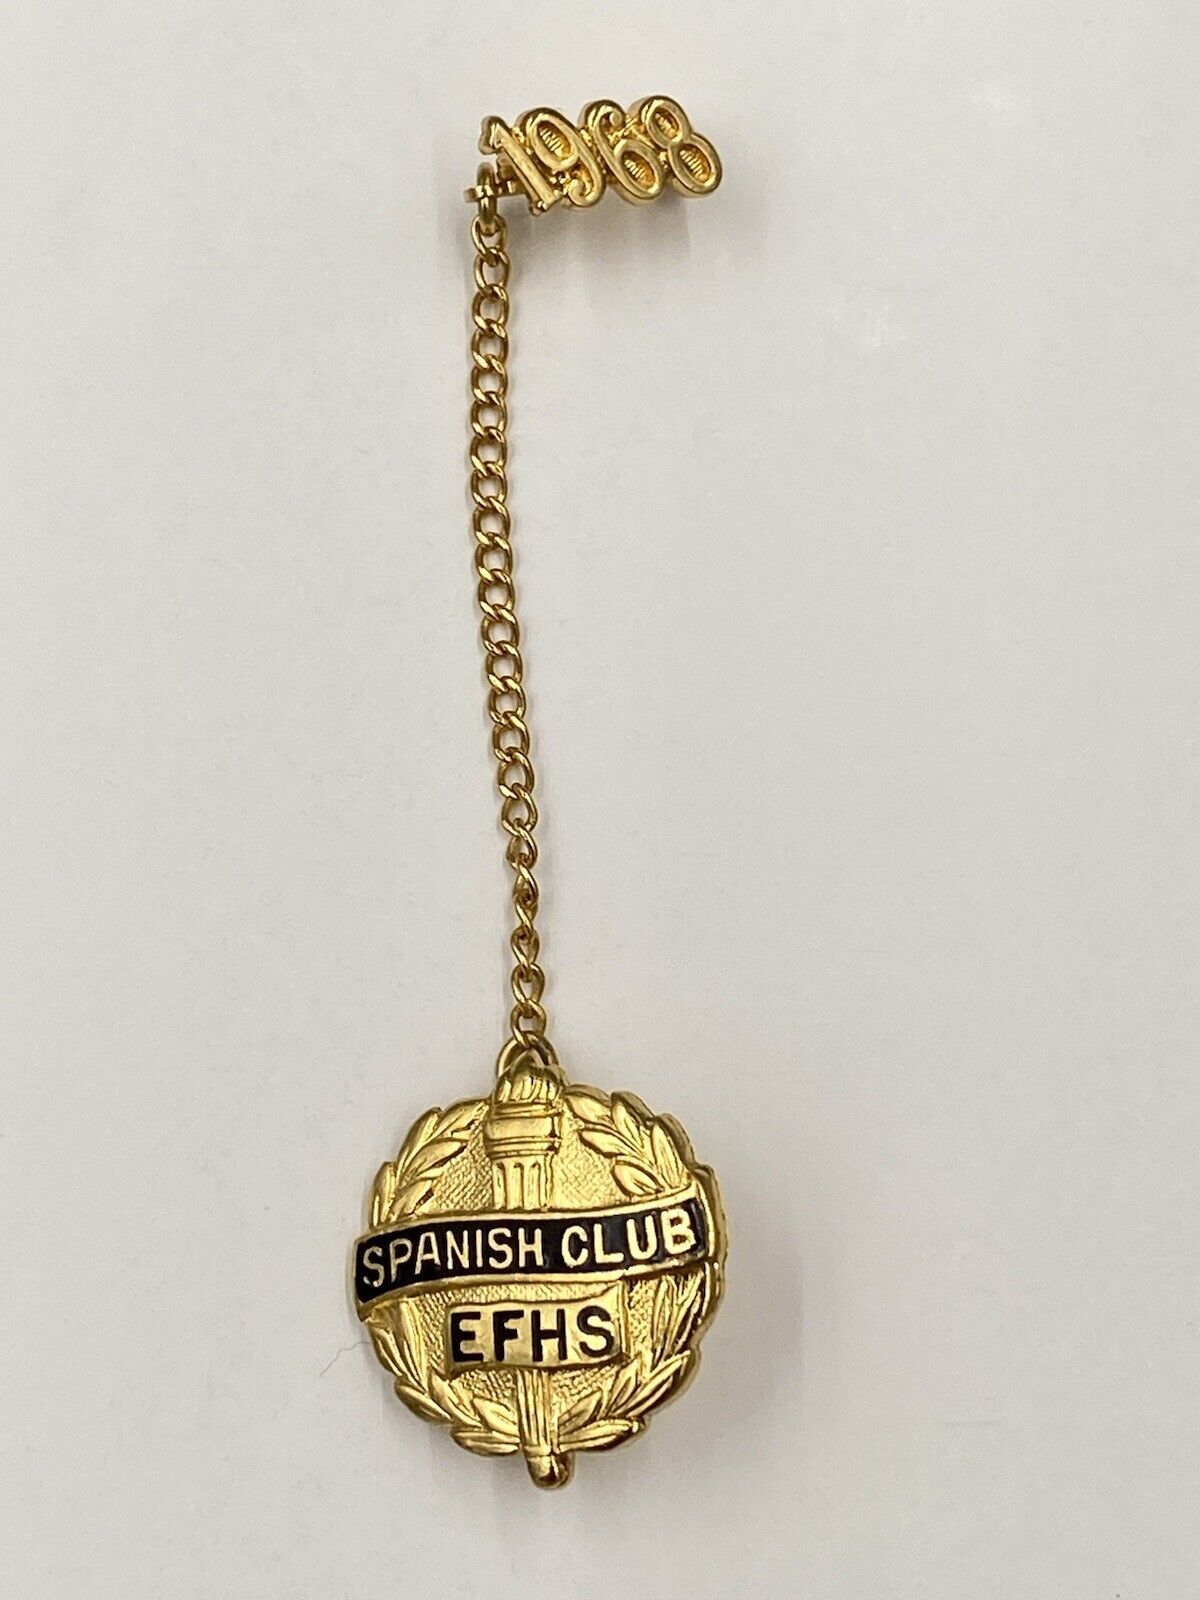 Vintage 1968 EFHS Spanish Club Gold Colored Lapel Pin Brooch